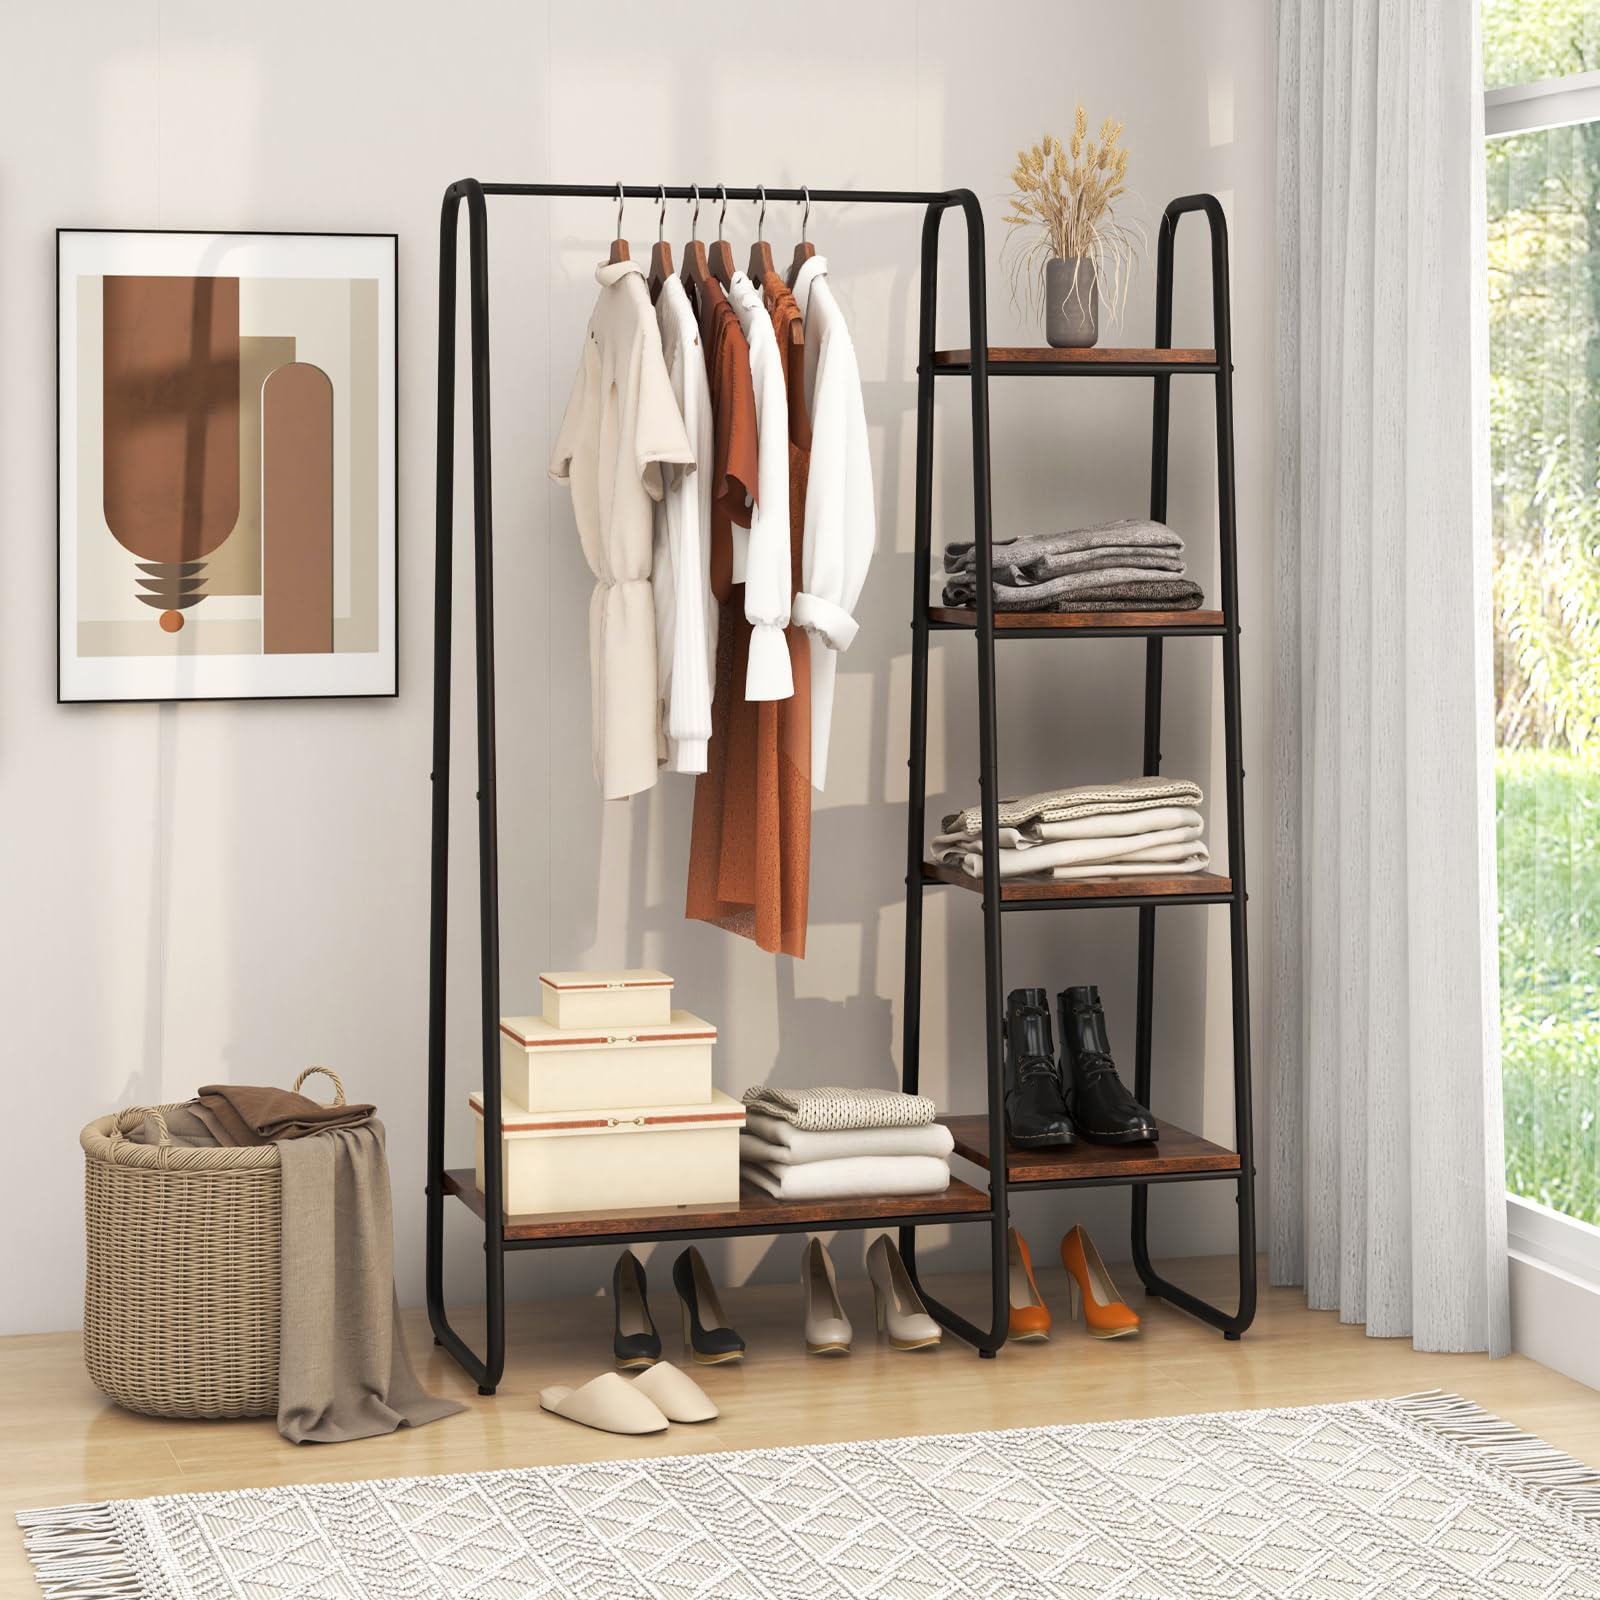 Giantex Clothes Rack with Shelves, Industrial Garment Rack with 5-Tier Shelves